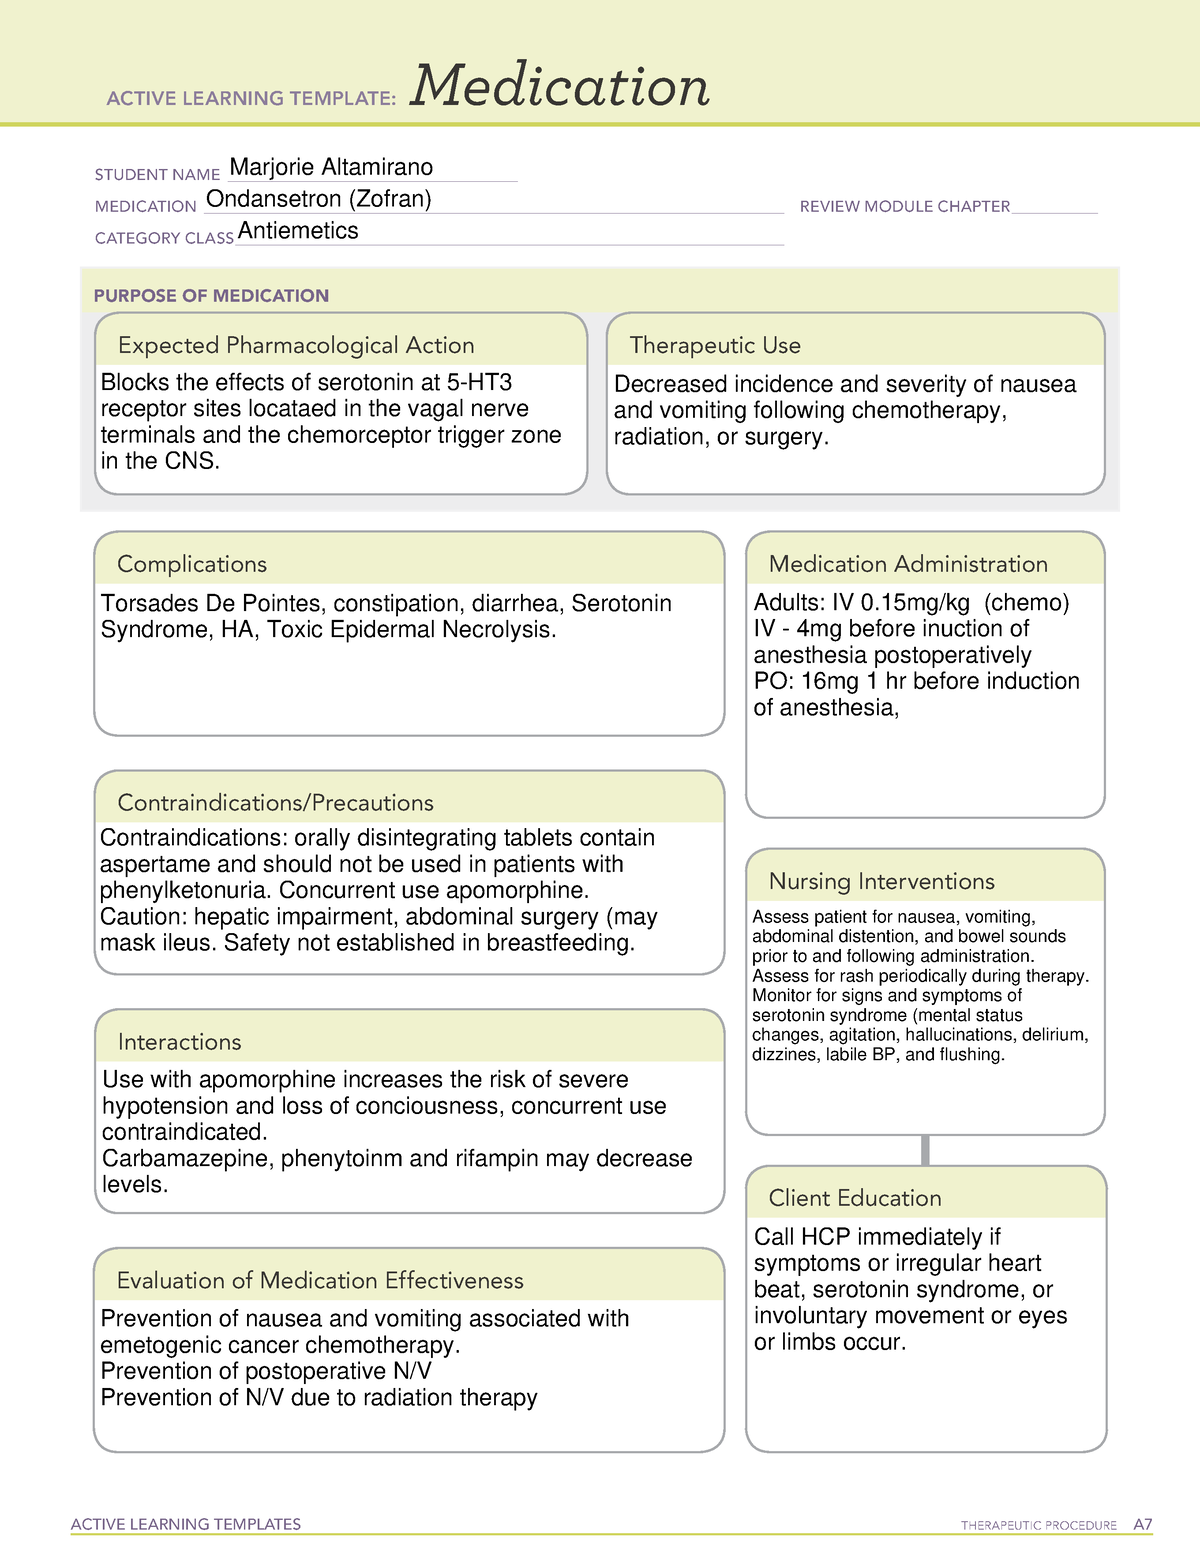 ondansetron-drug-card-template-active-learning-templates-therapeutic